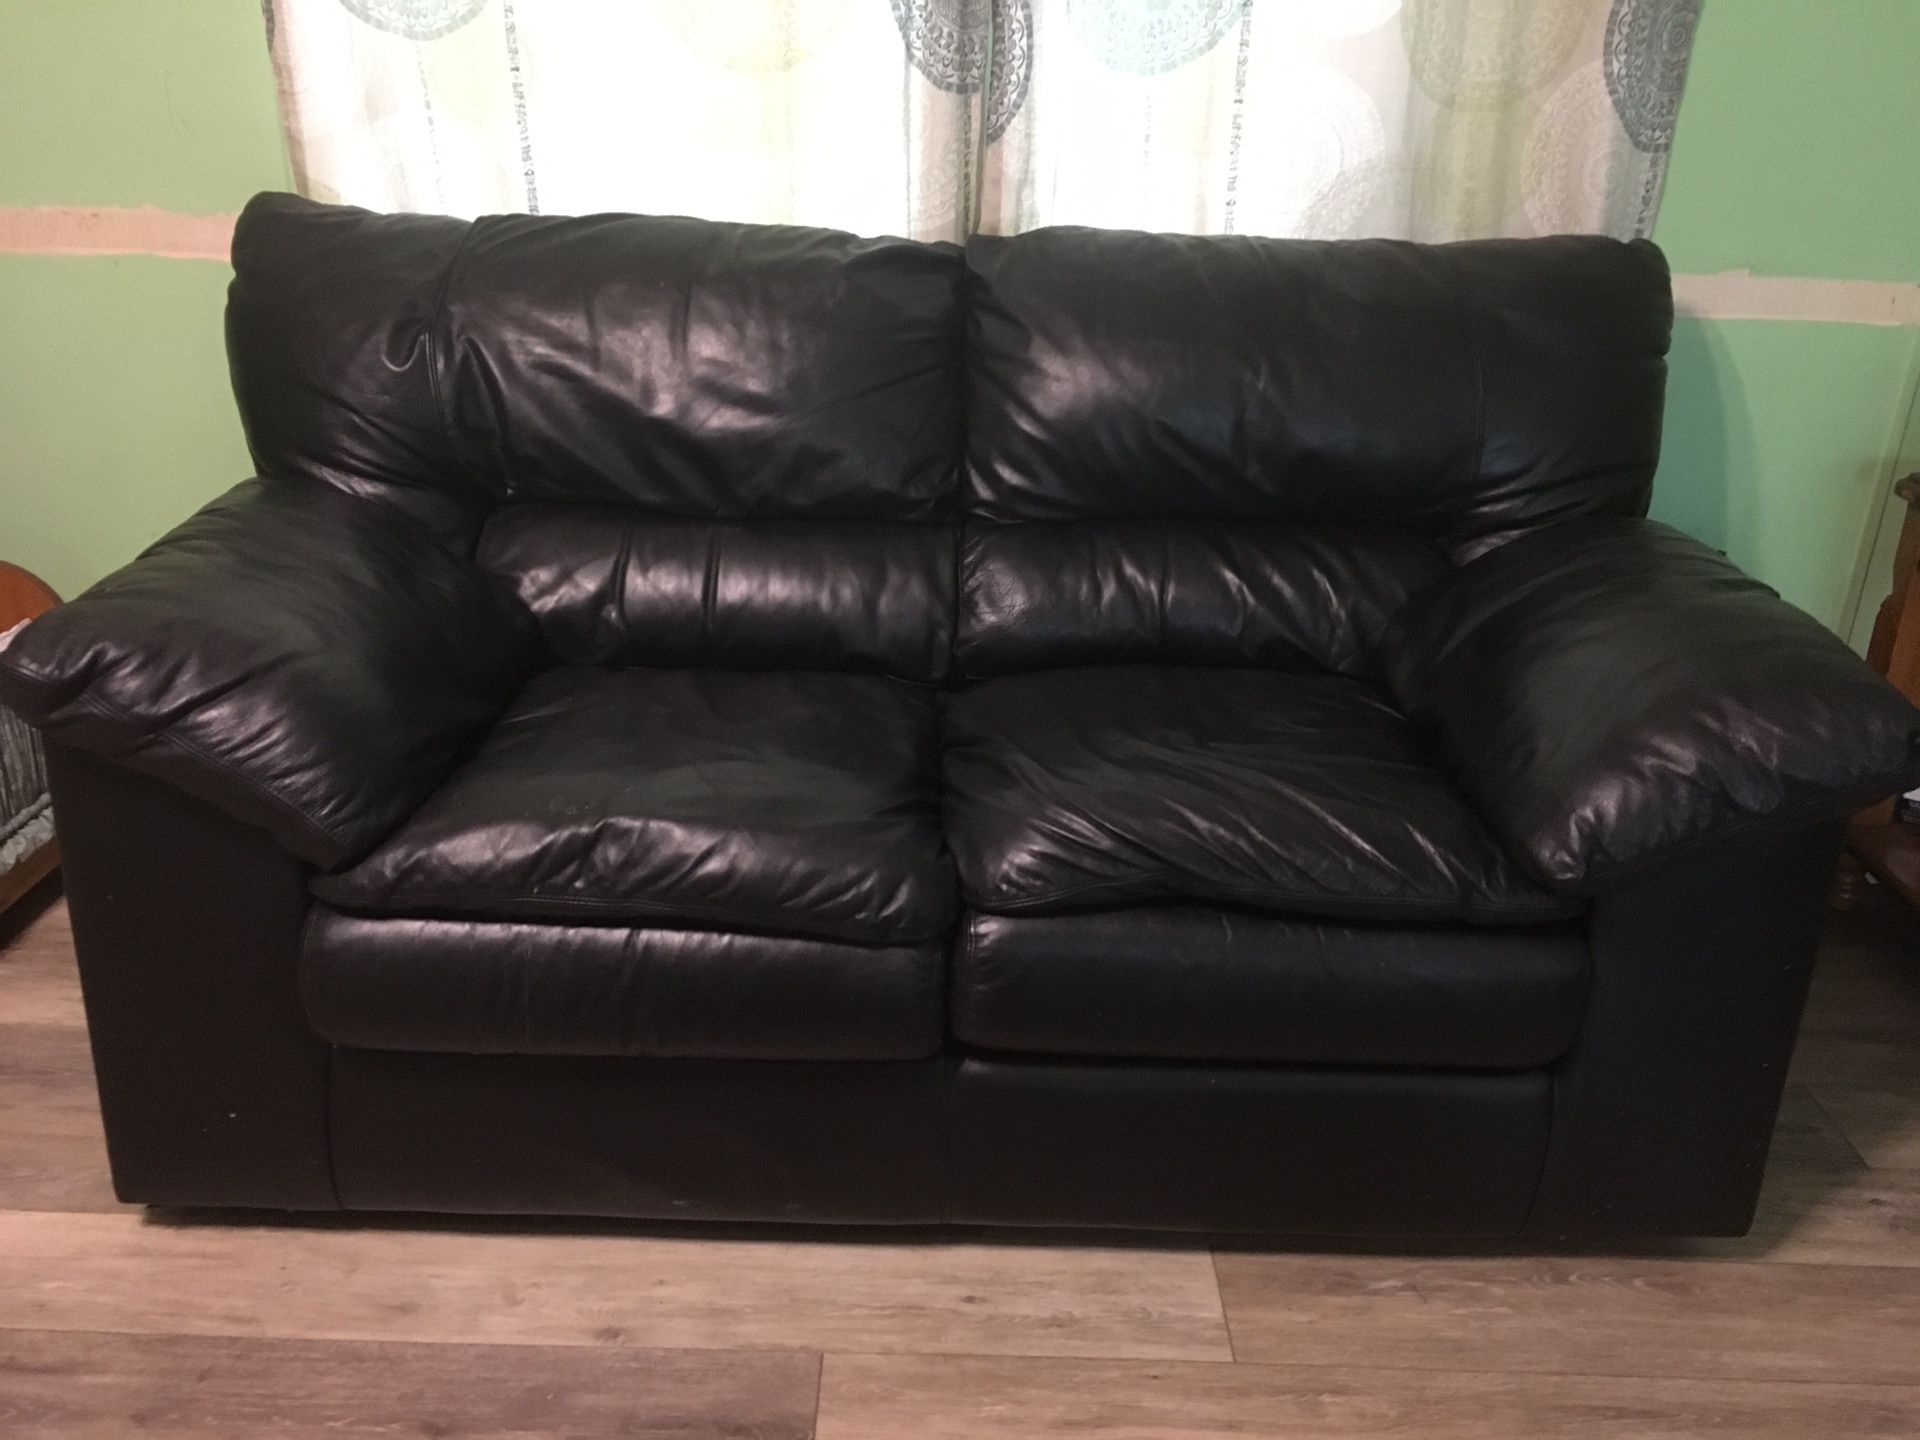 Black leather love seat and oversized chair